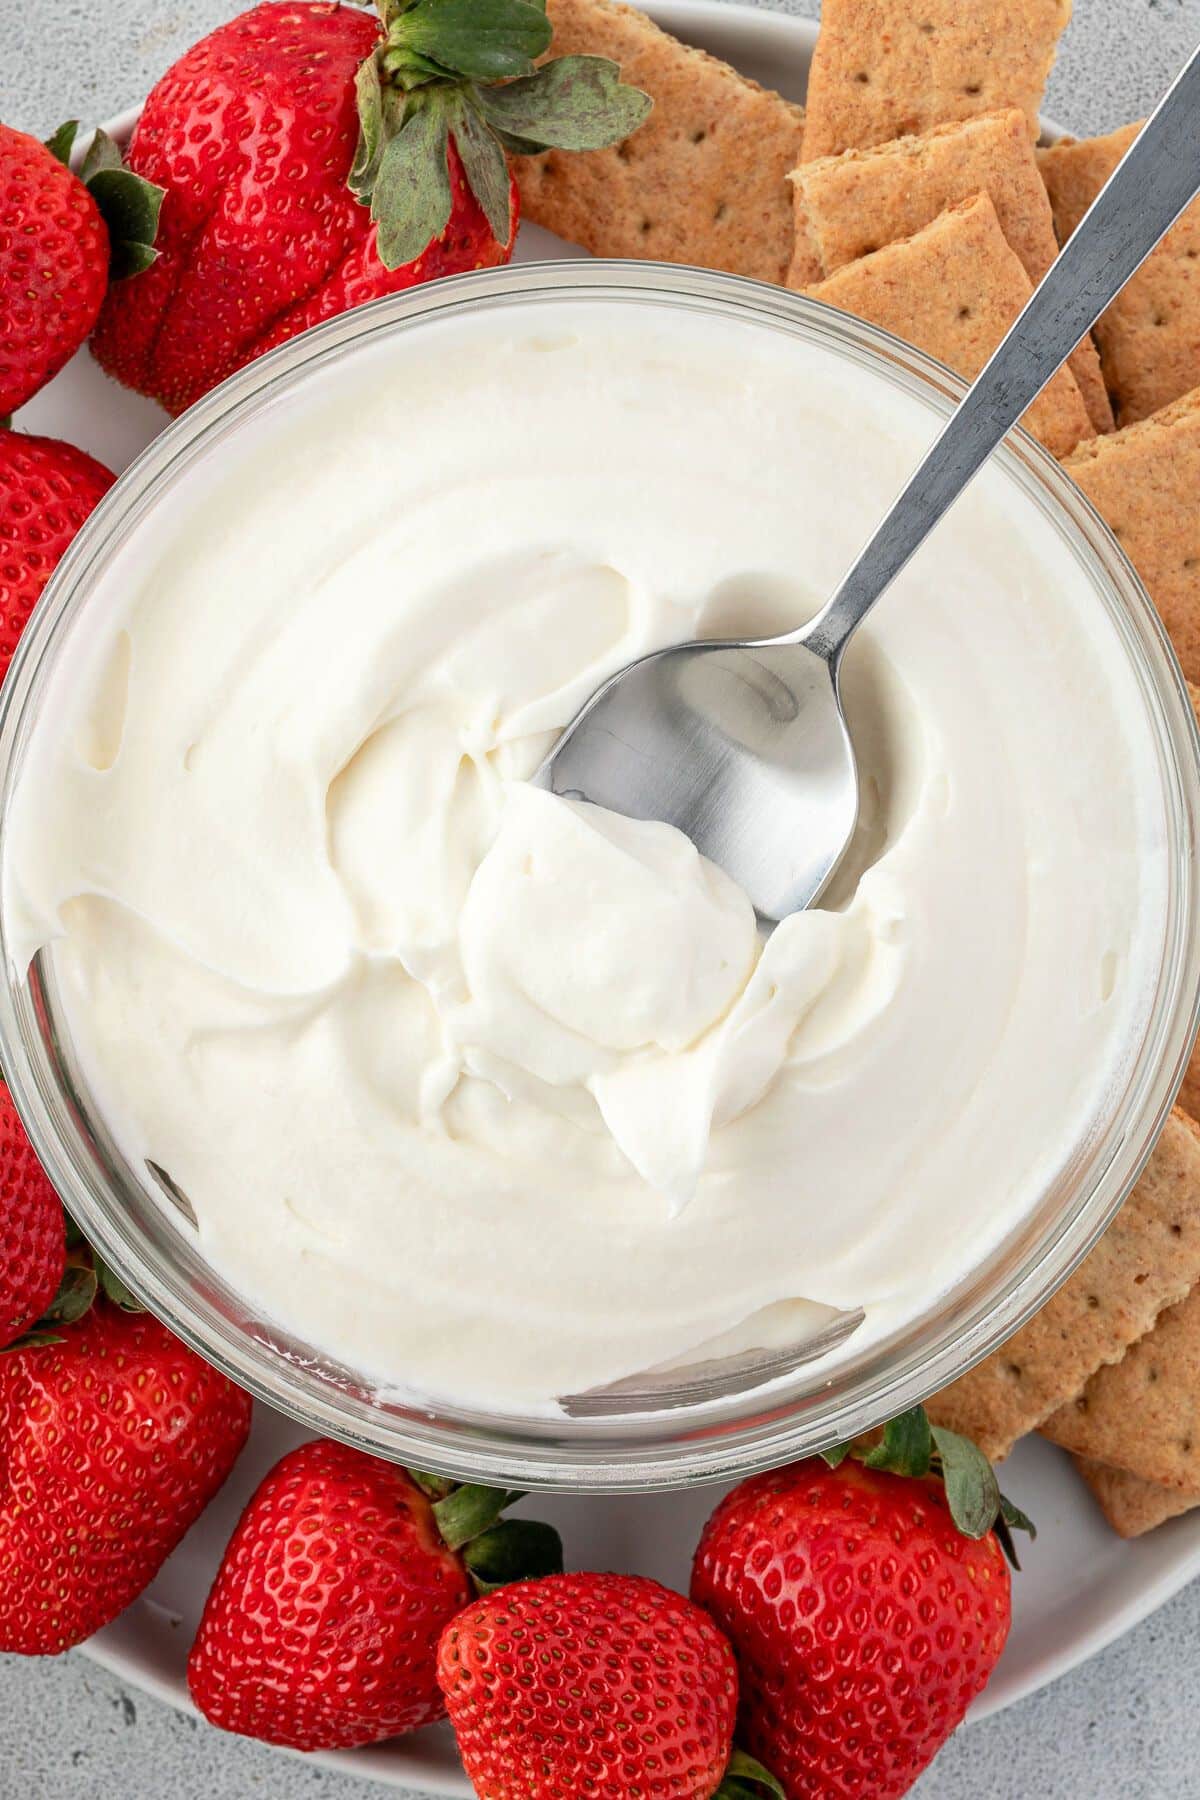 Marshmallow whipped cream in a bowl with a silver spoon on a platter of strawberries and graham crackers.